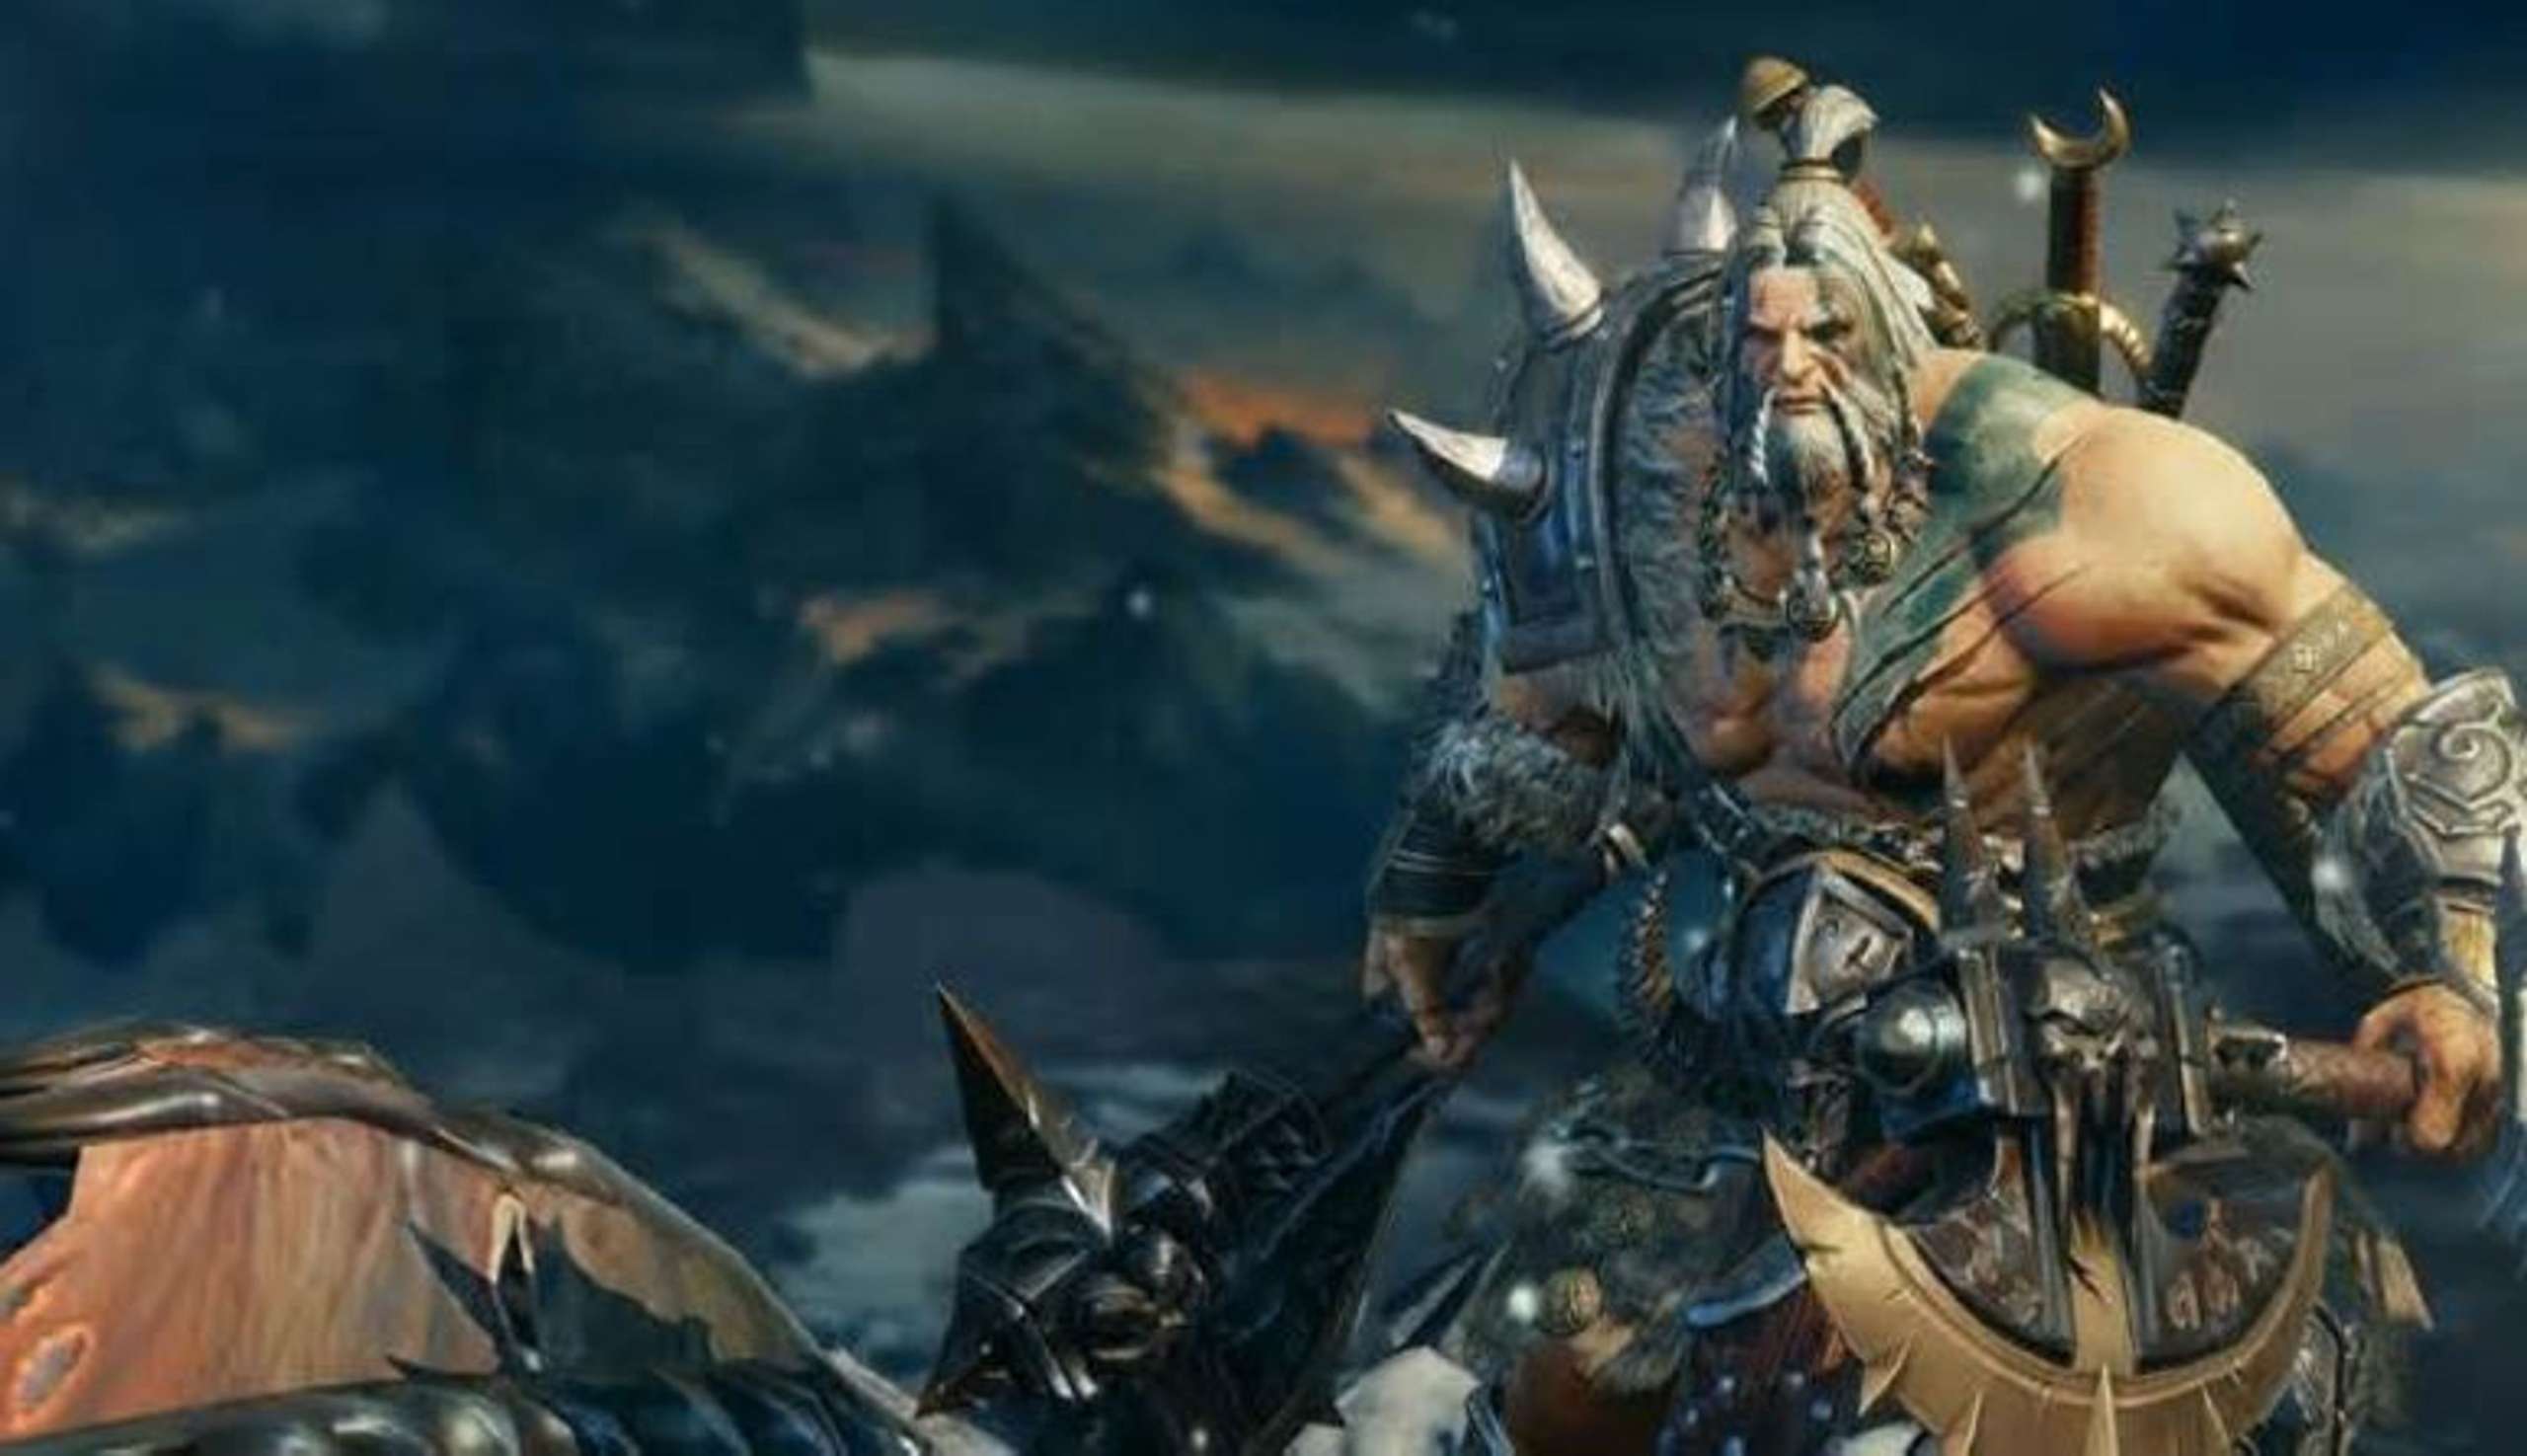 The Release Of Diablo Immortal In China Was Reportedly Postponed Indefinitely Back In June